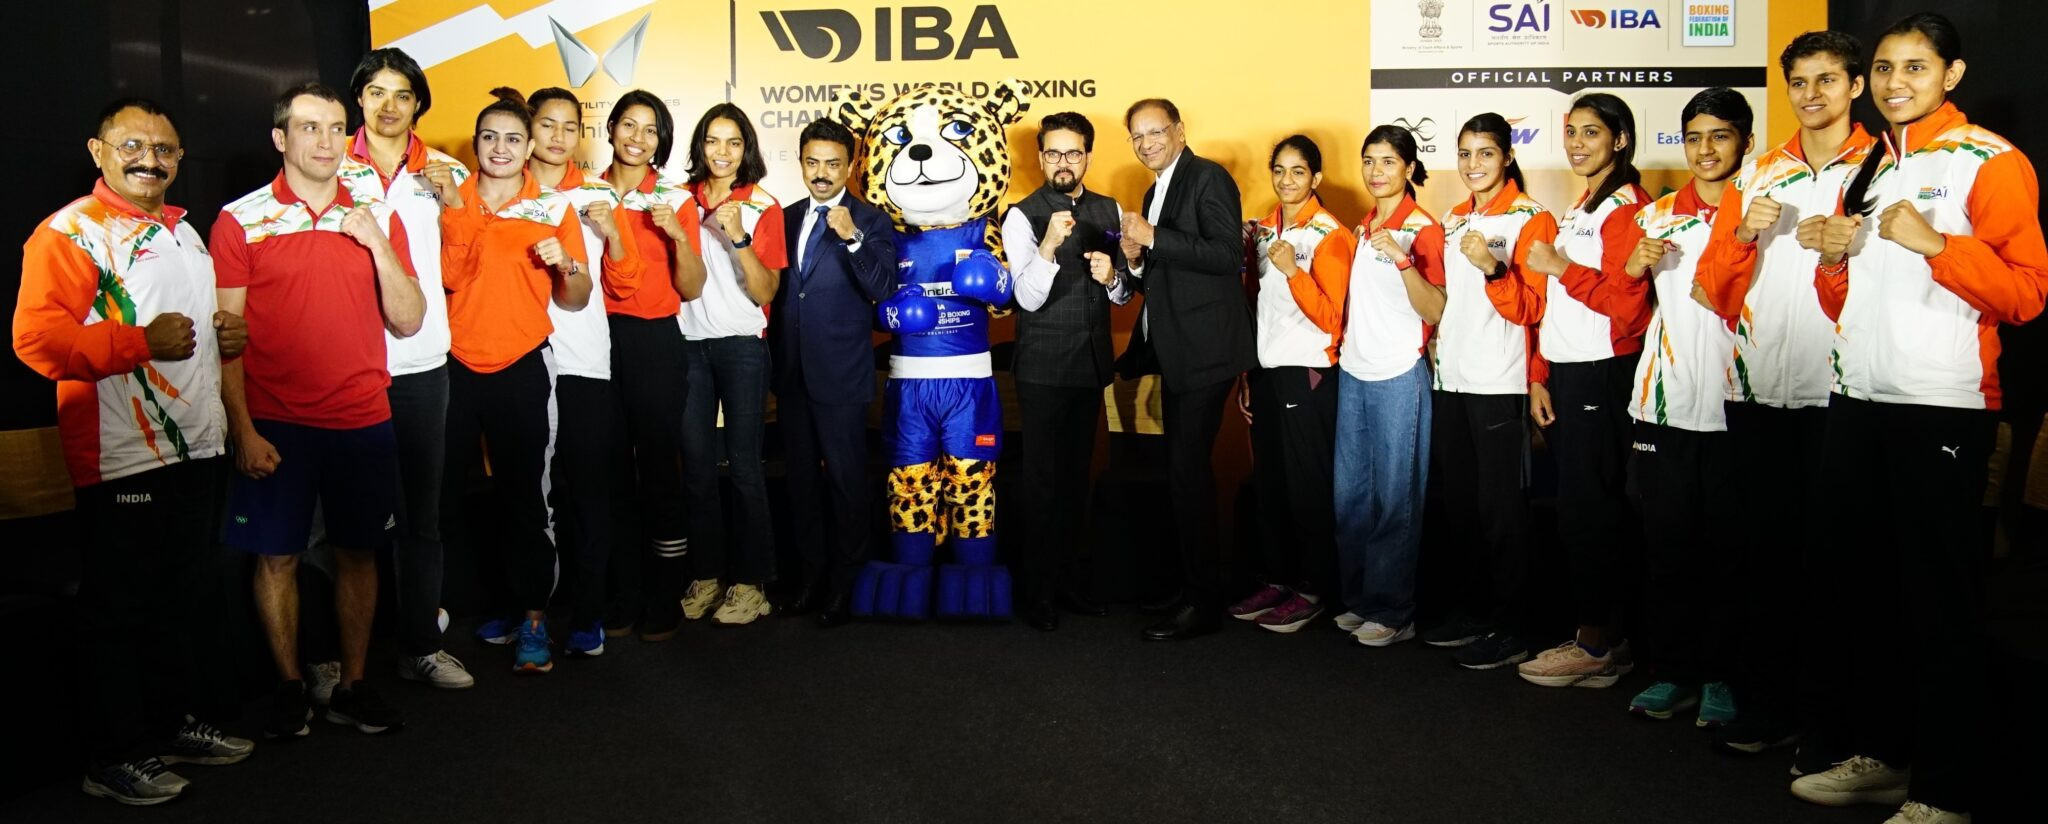 Veera the cheetah has been unveiled as the mascot for the 2023 IBA Women's World Championships ©IBA